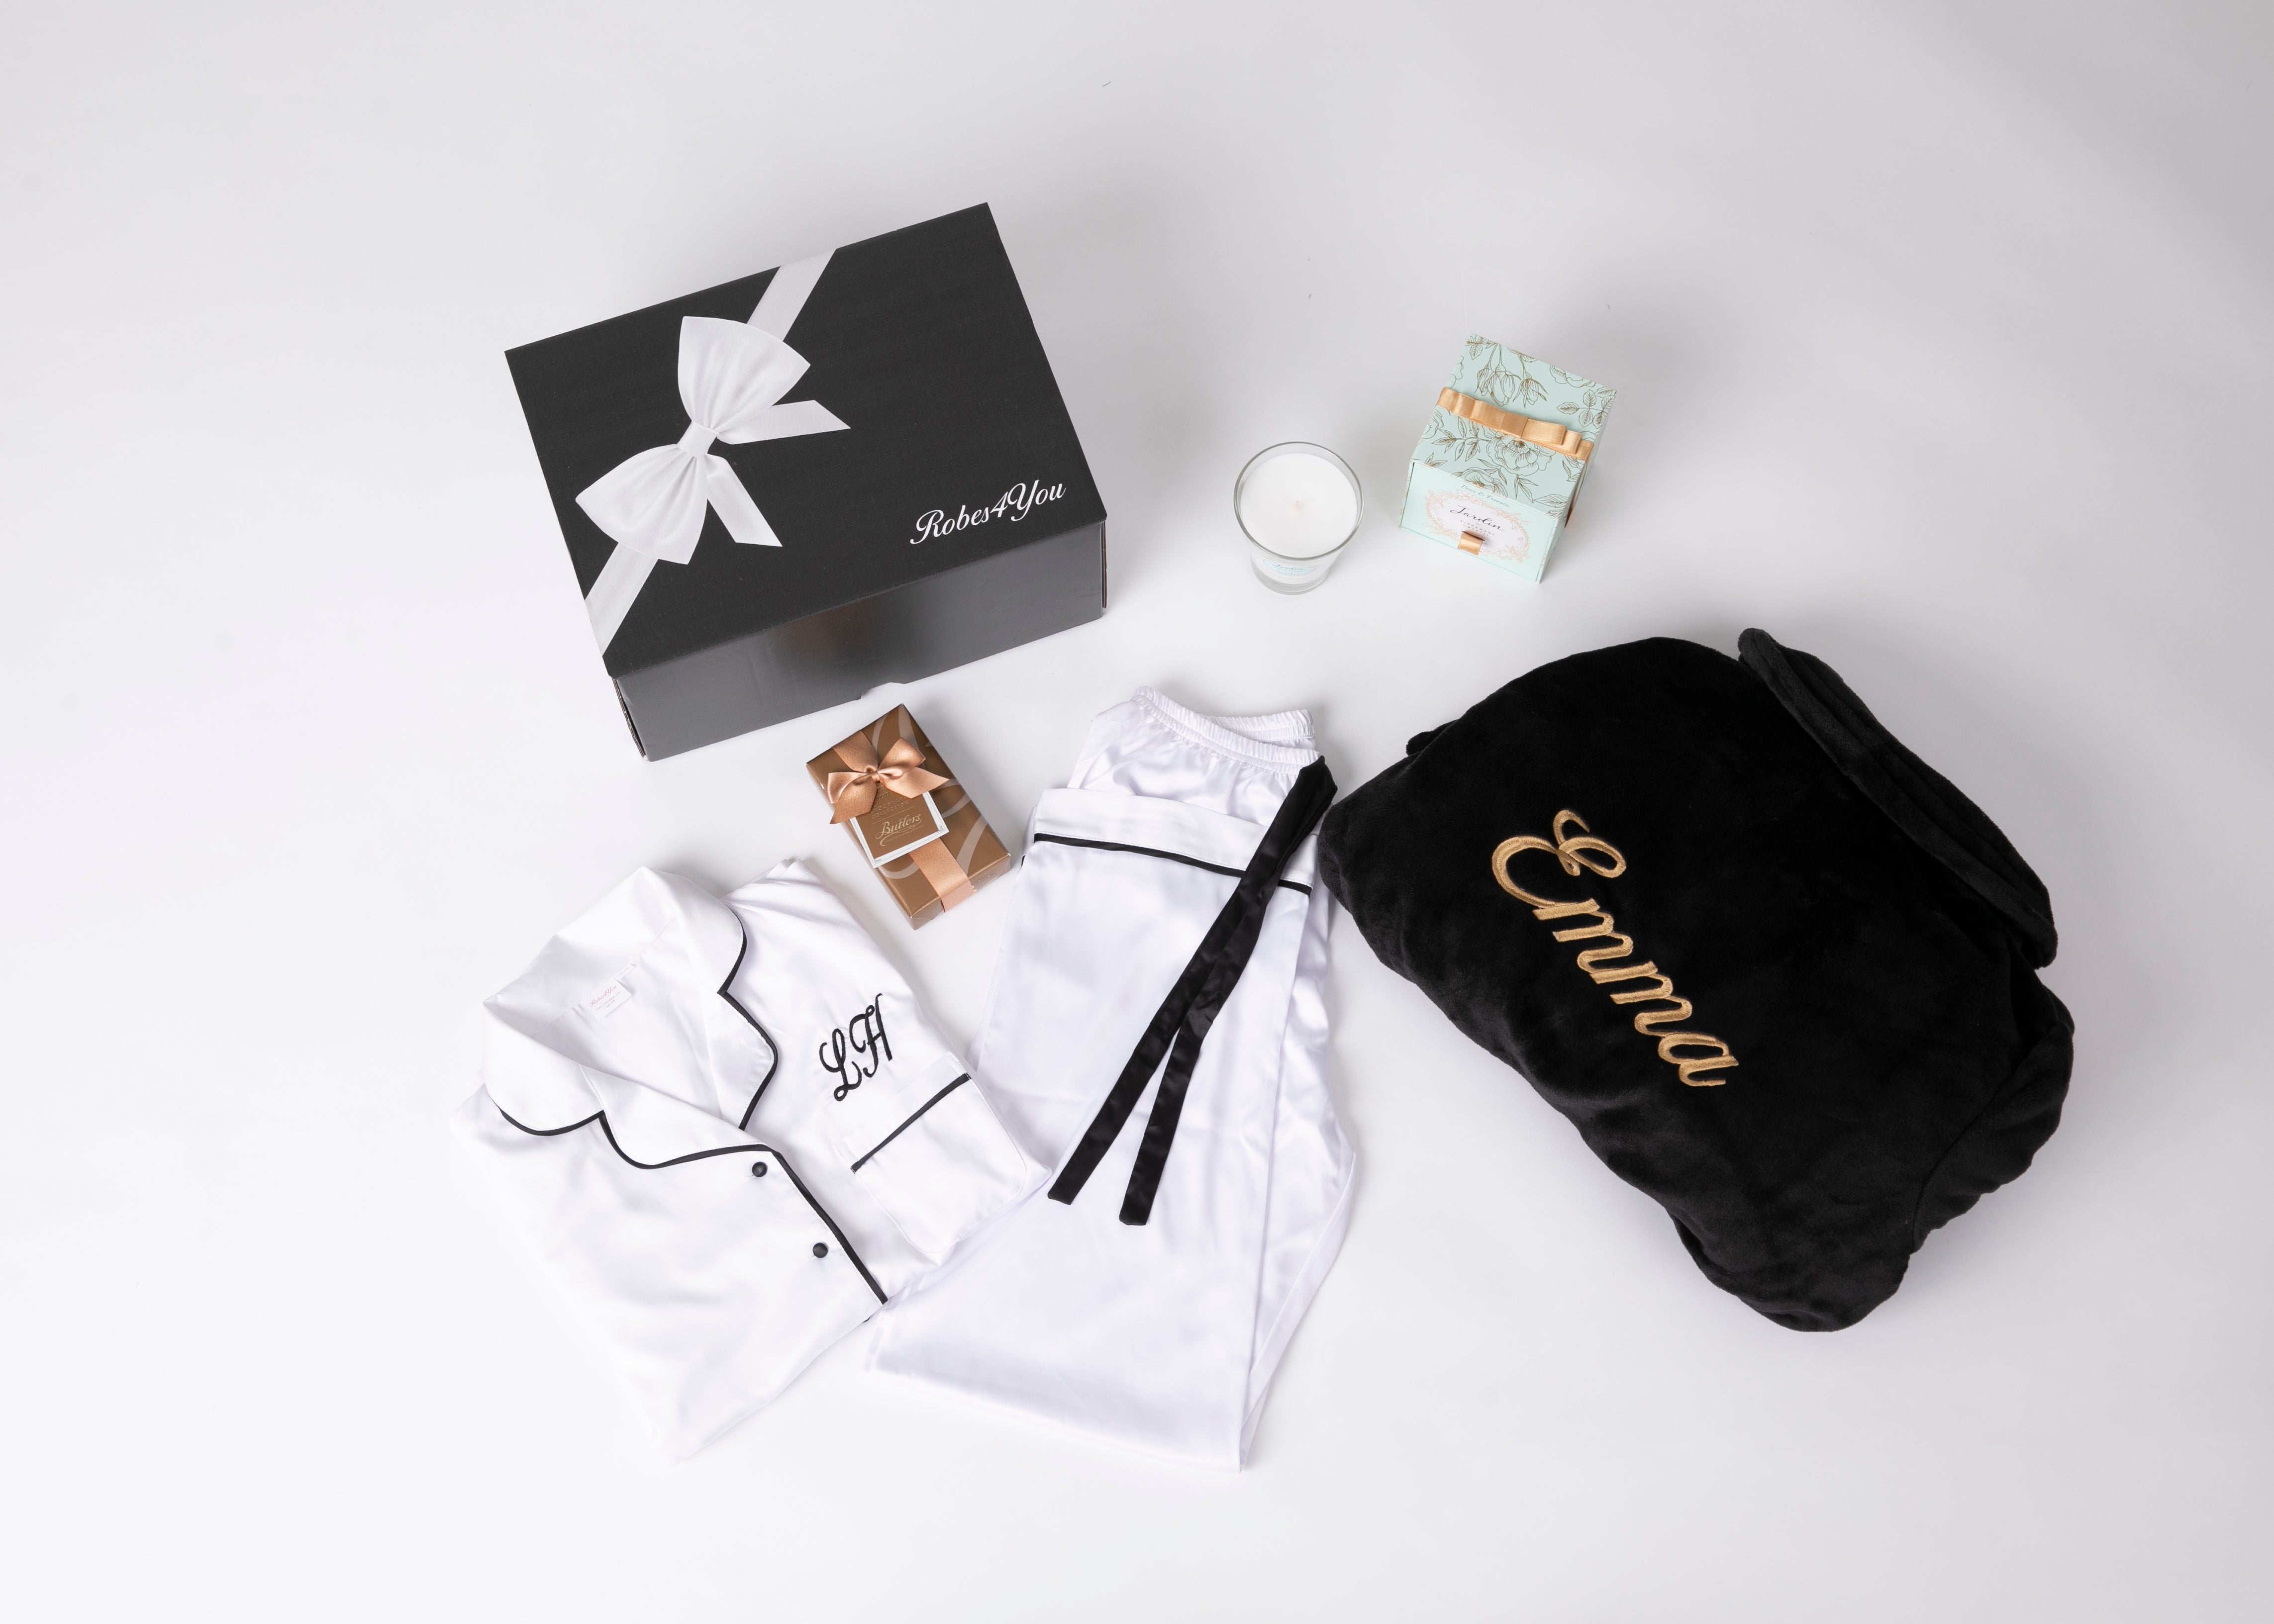 Luxurious Soft Fluffy Robe Hamper &  Long Satin Pyjamas with candle and chocolates  presented in a gift box